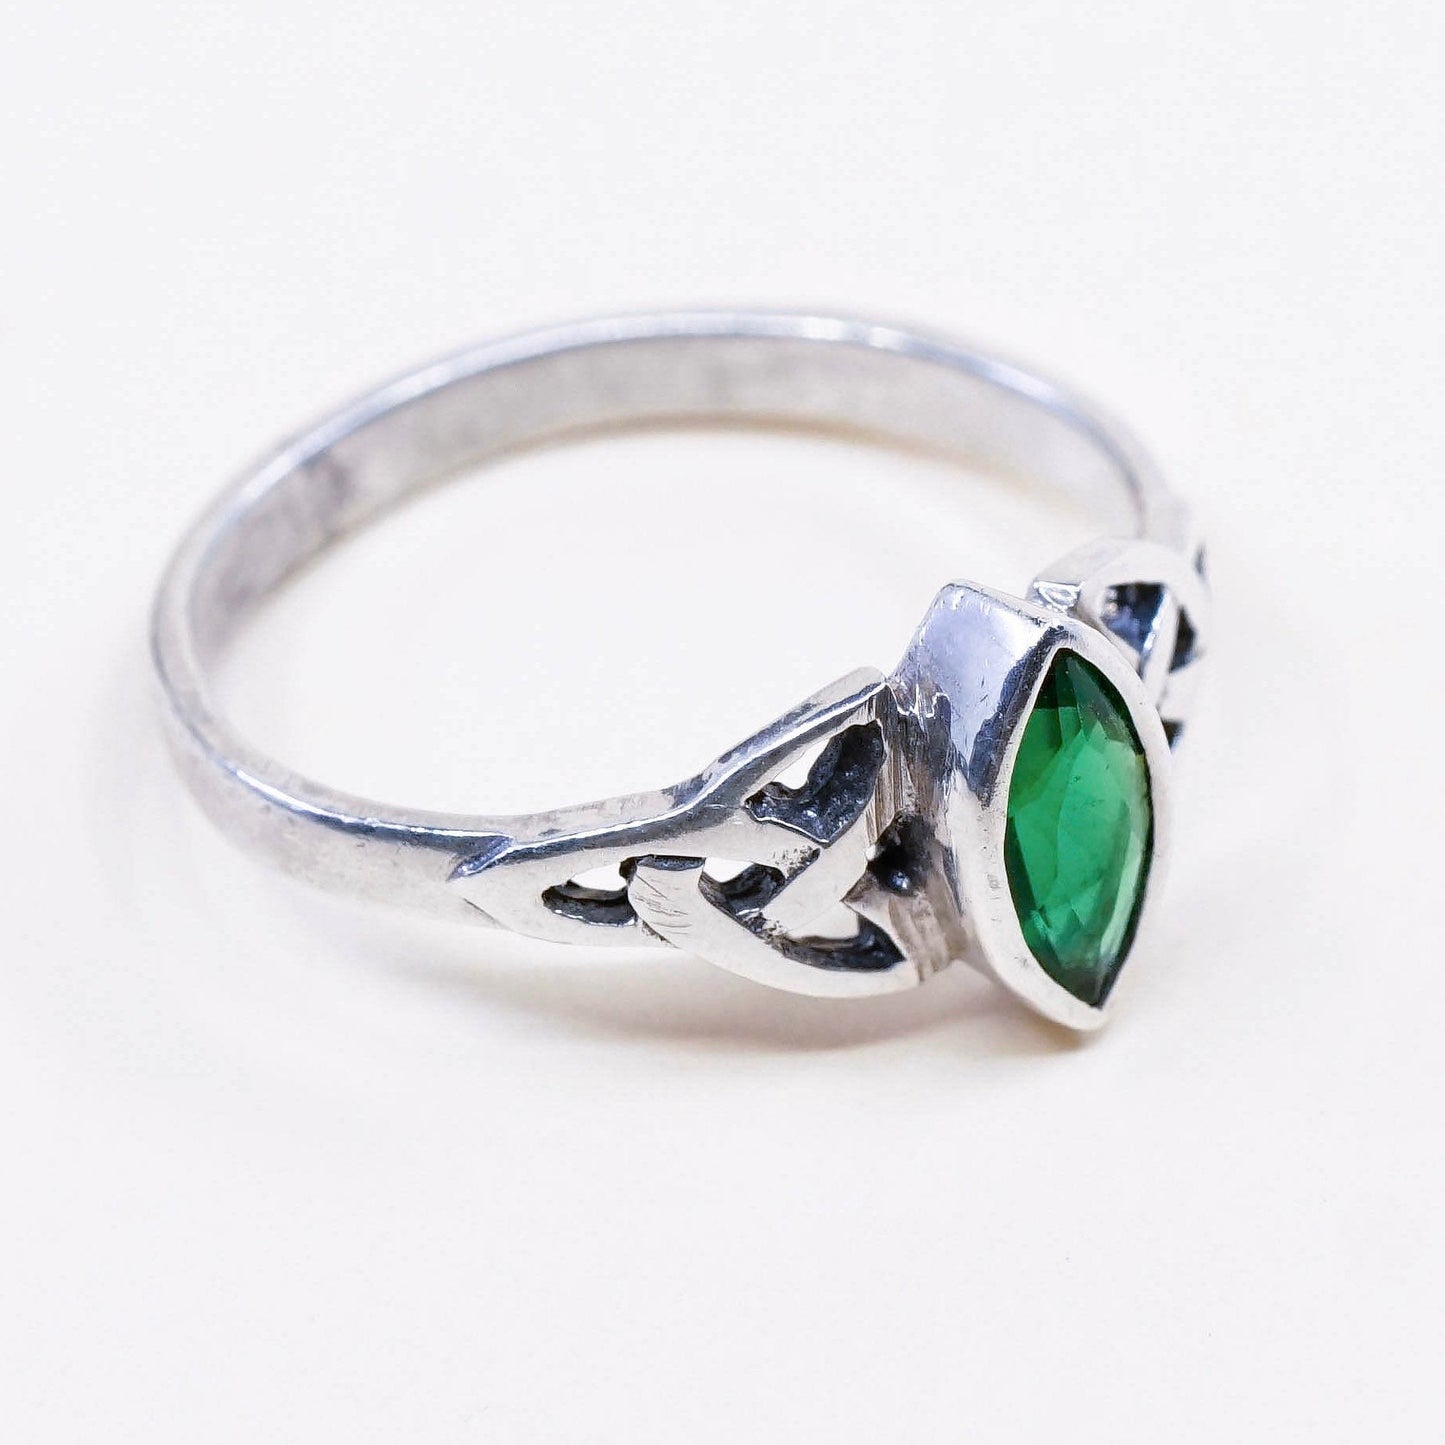 Size 6.75, Vintage sterling 925 silver handmade ring with peridot